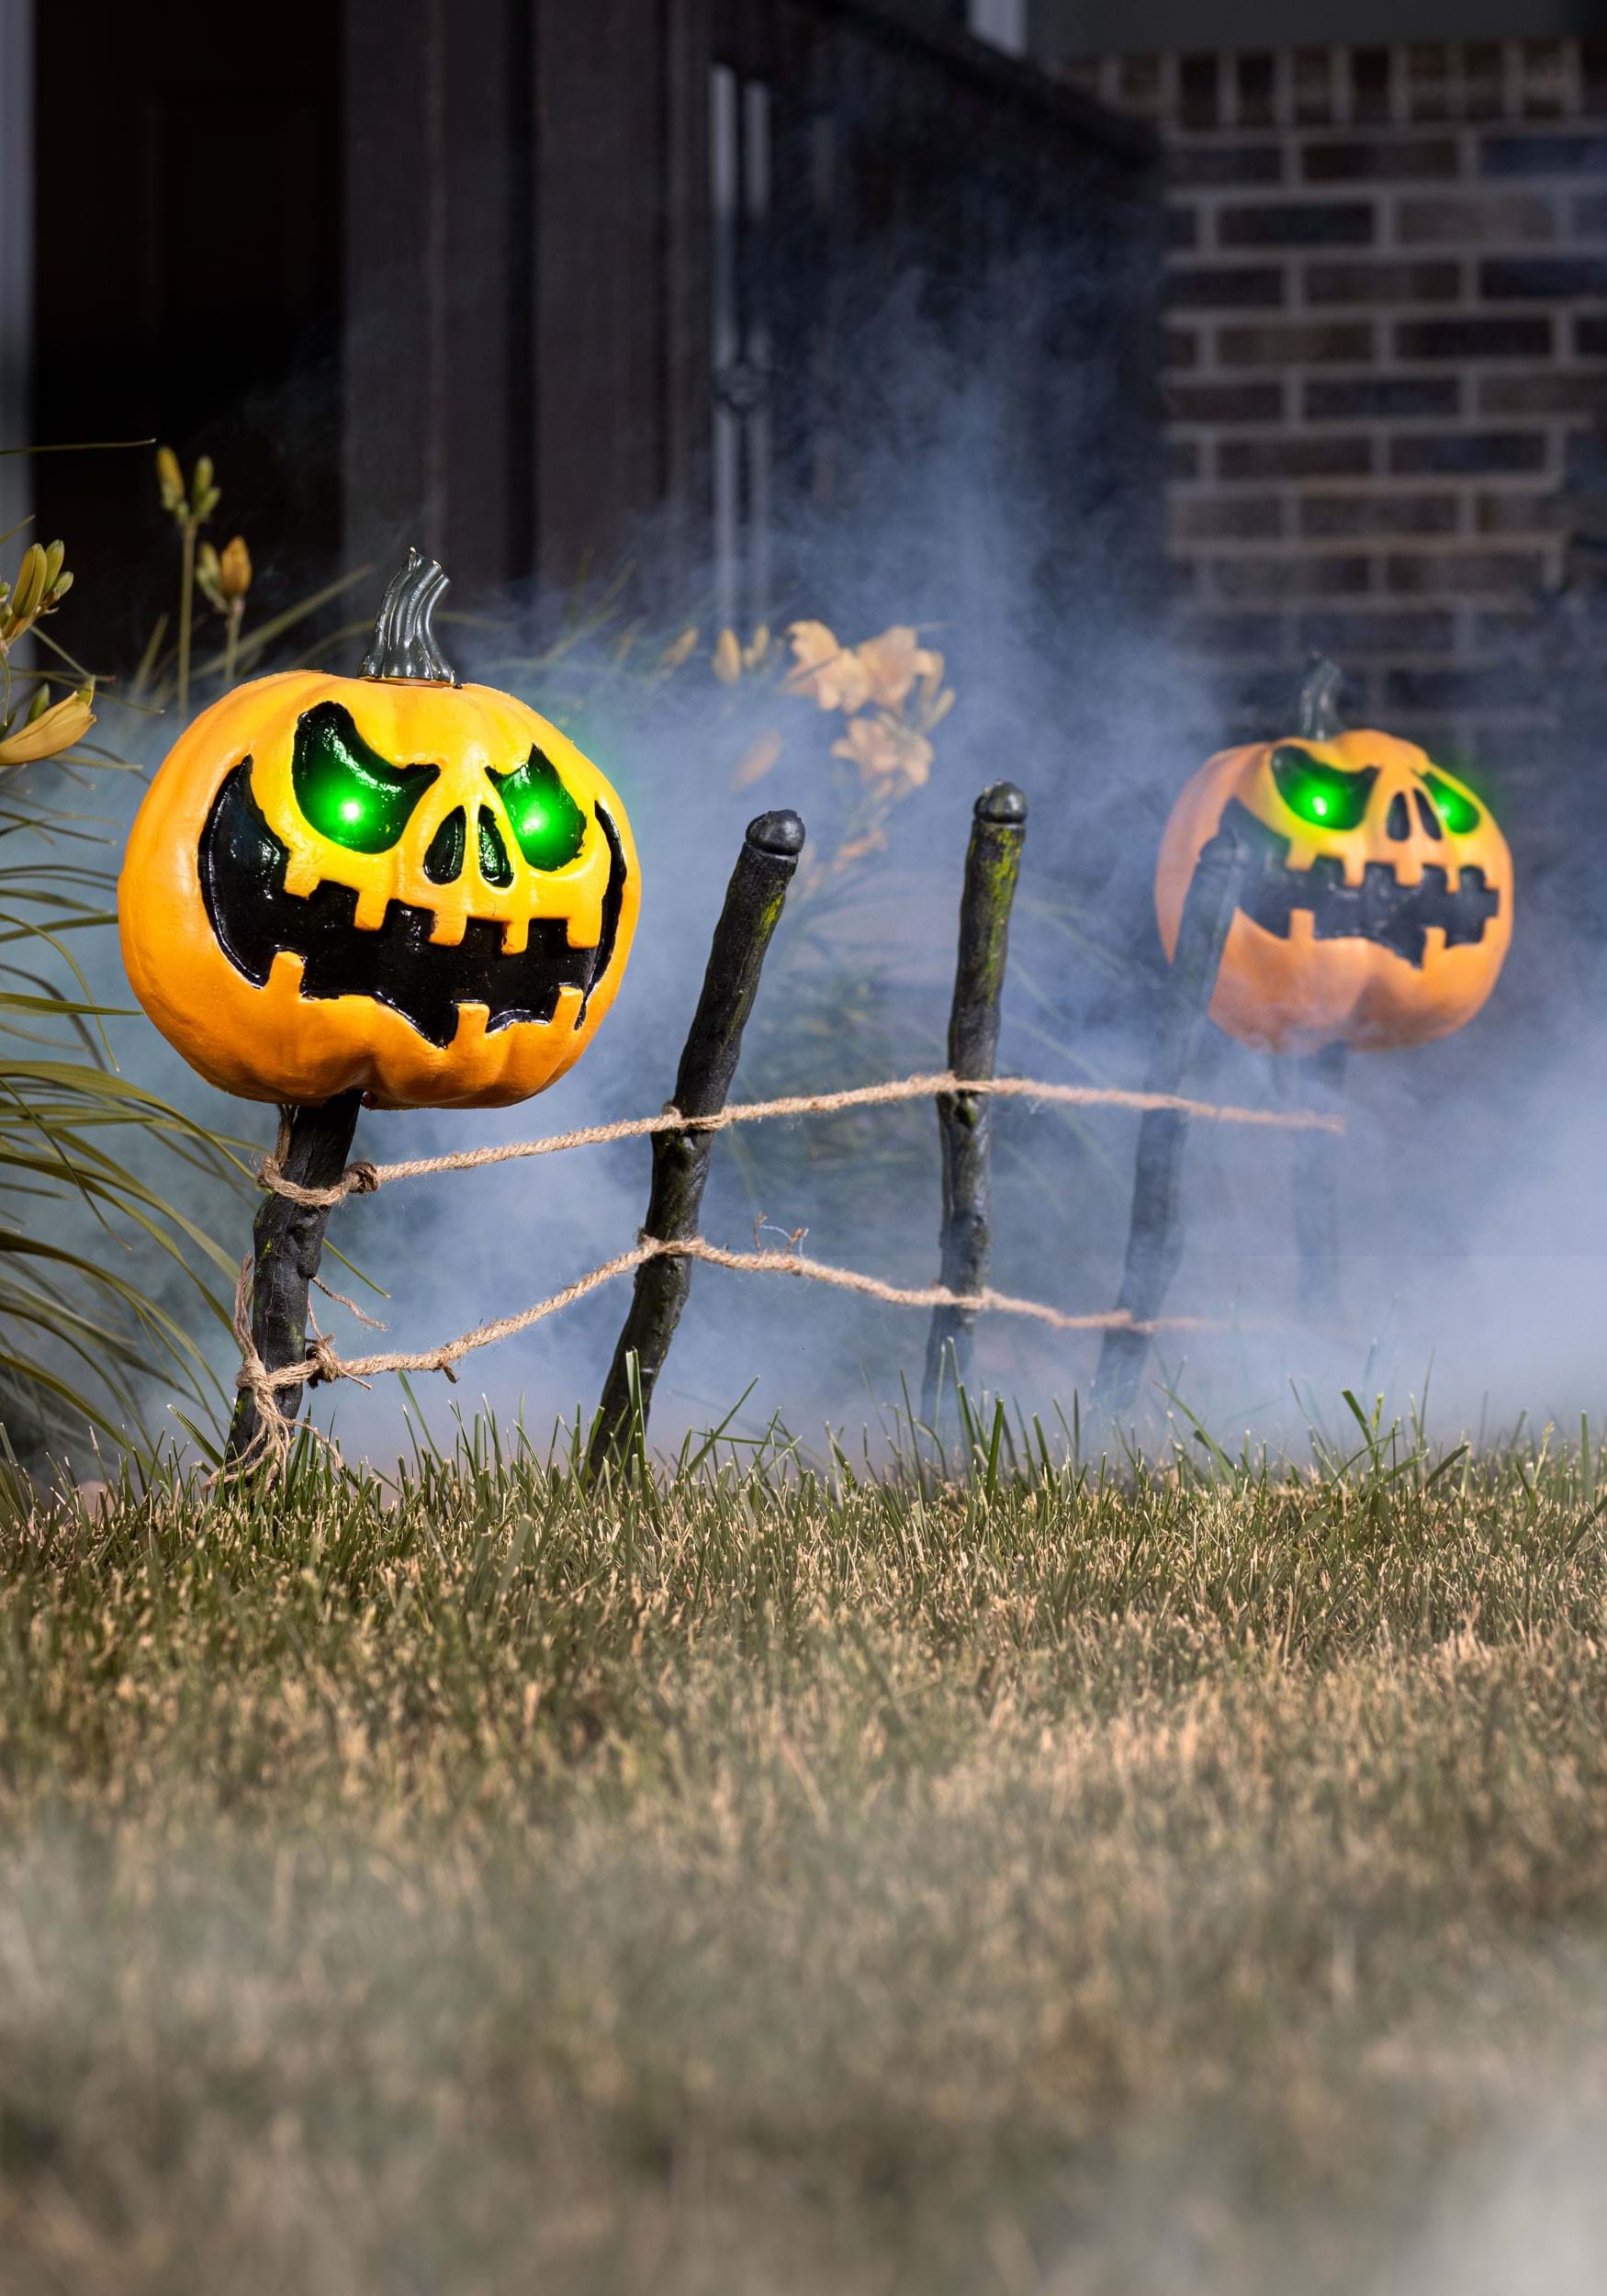 Spooky Pumpkin Fence with Green Light Decoration